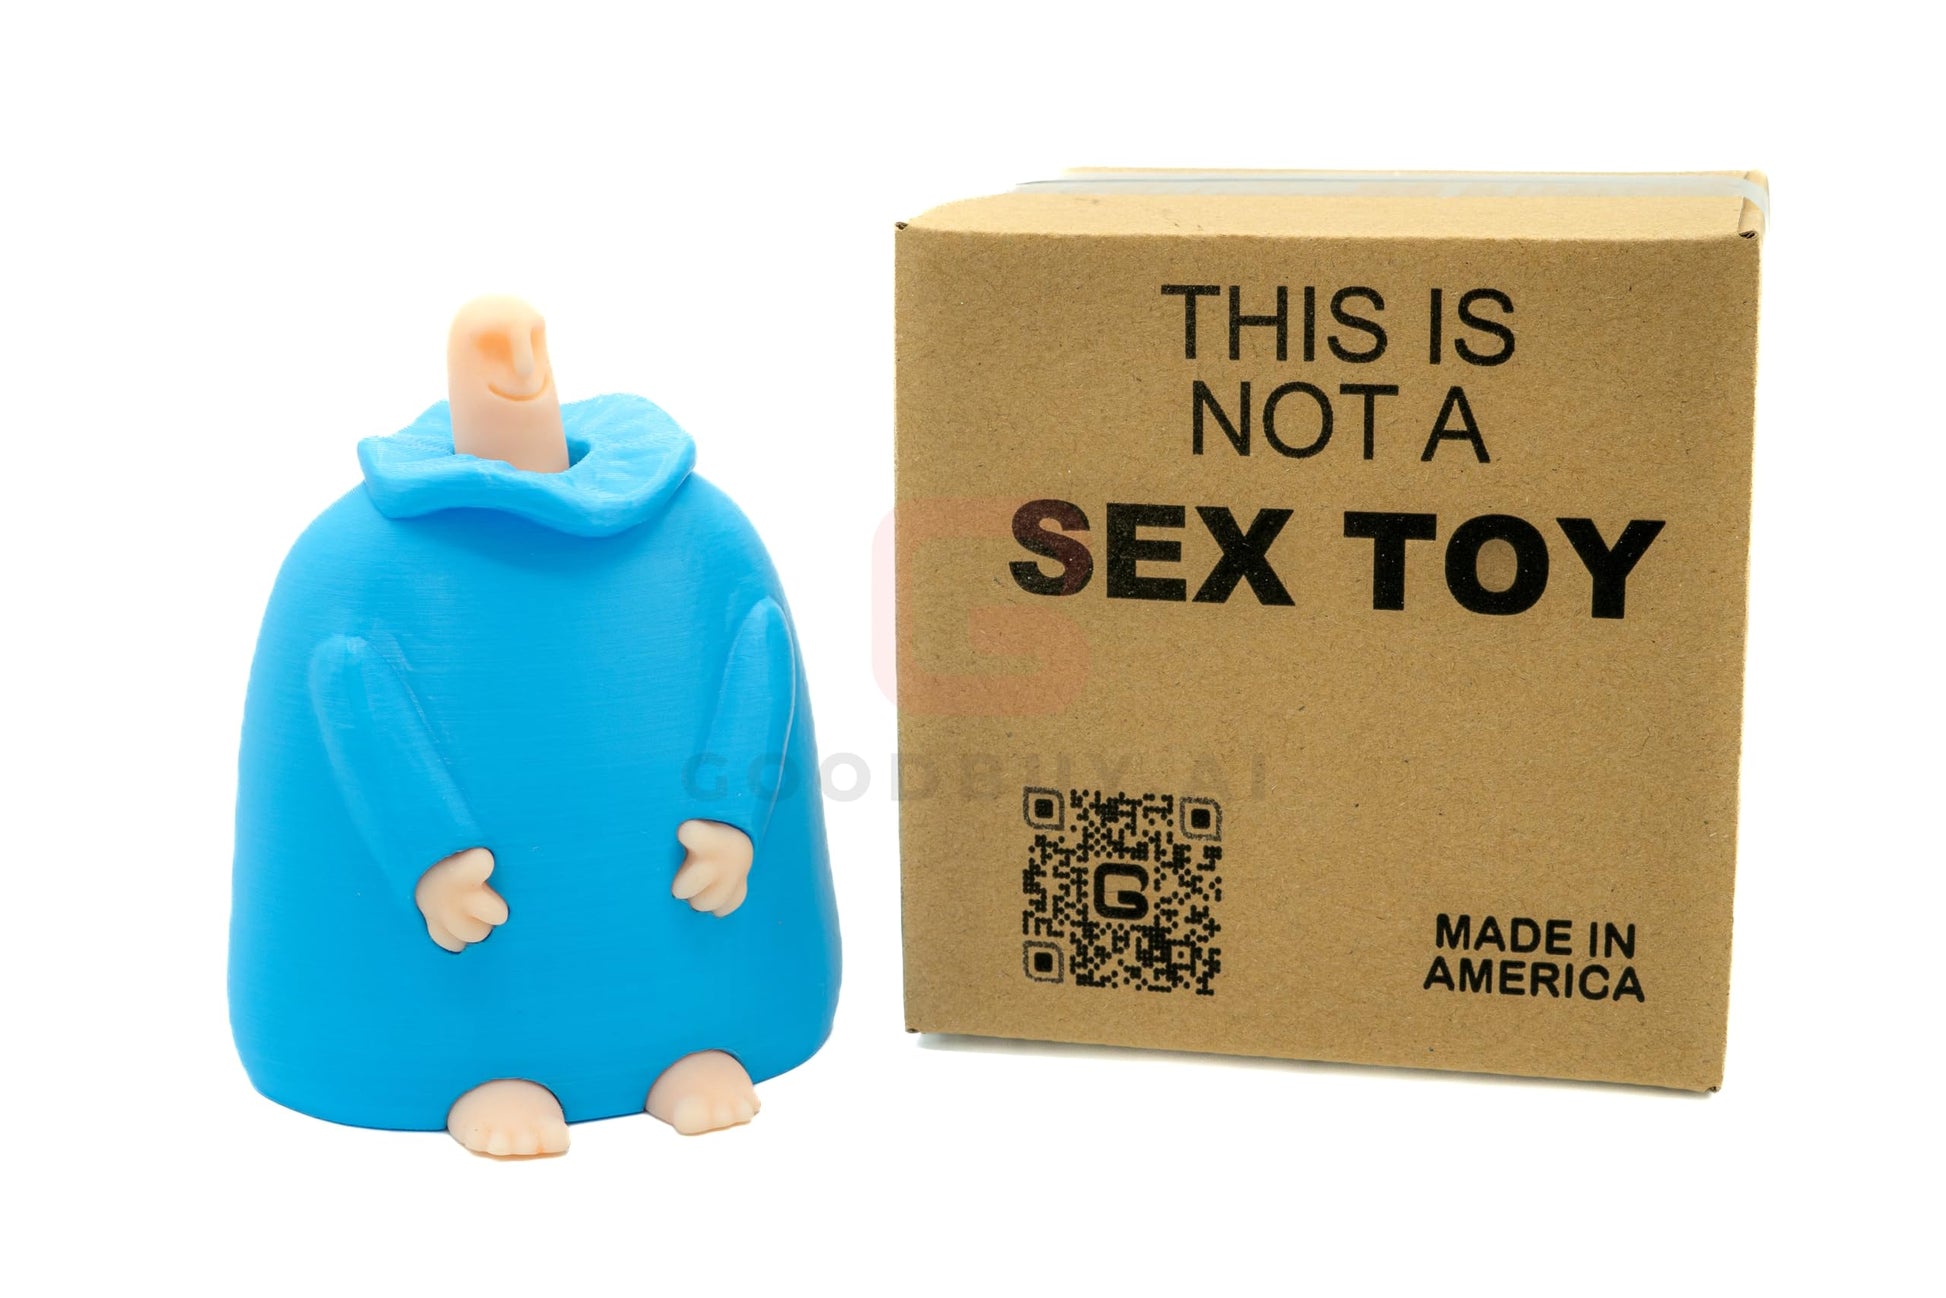 GoodBuy.ai's Mr. Nice Guy - Ultimate Prank Gift in "Not a Sex Toy" Box - 3D Printed Viral Sensation - GoodBuy.ai